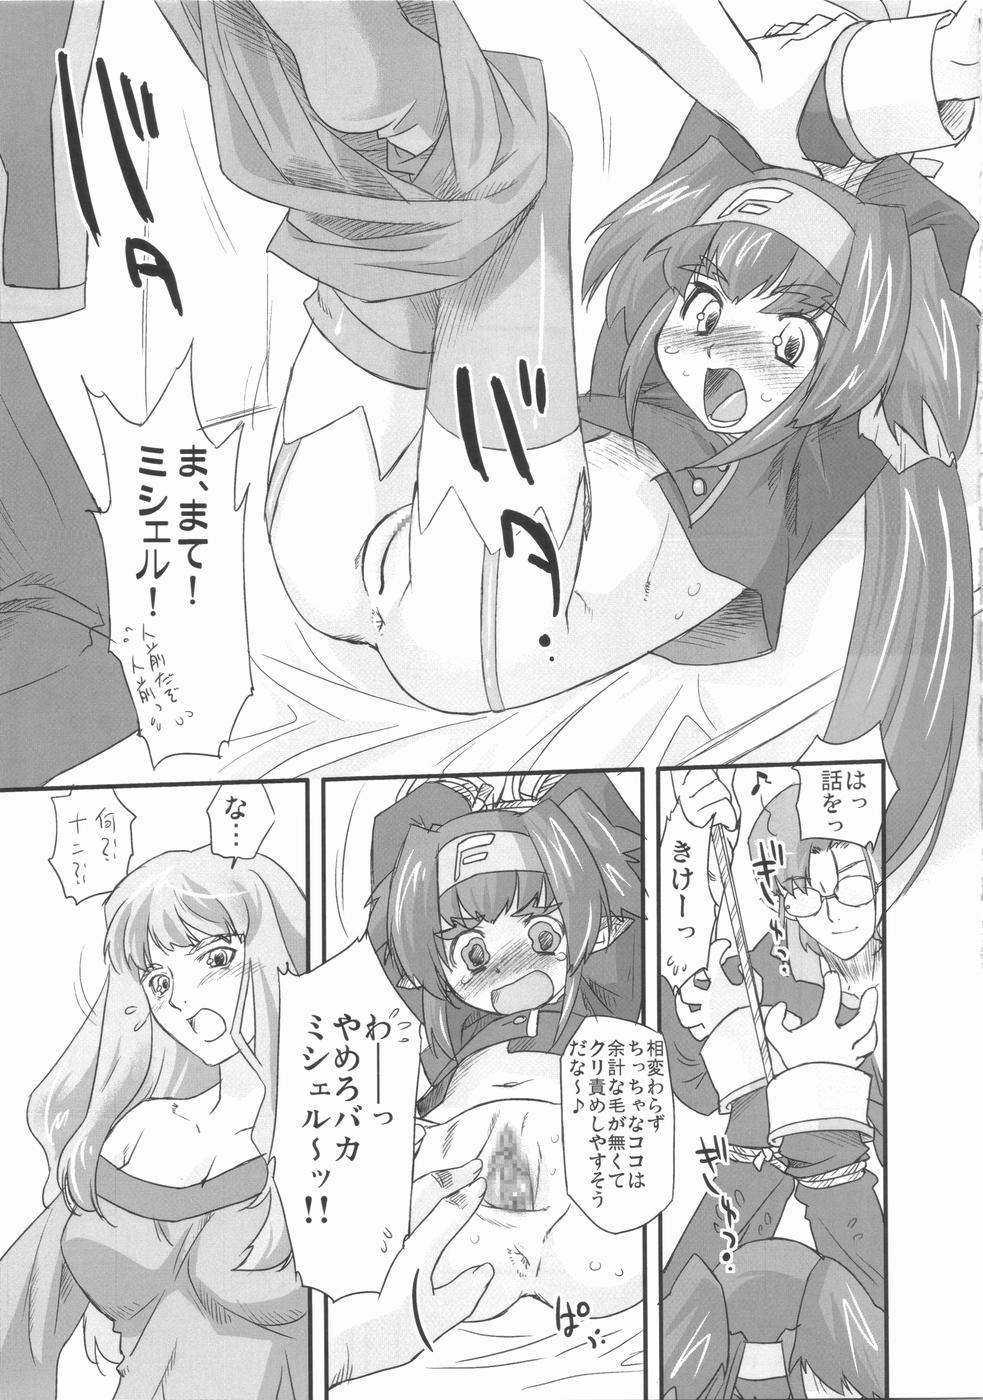 Old And Young Frontier Spirits! - Macross frontier Twinkstudios - Page 7